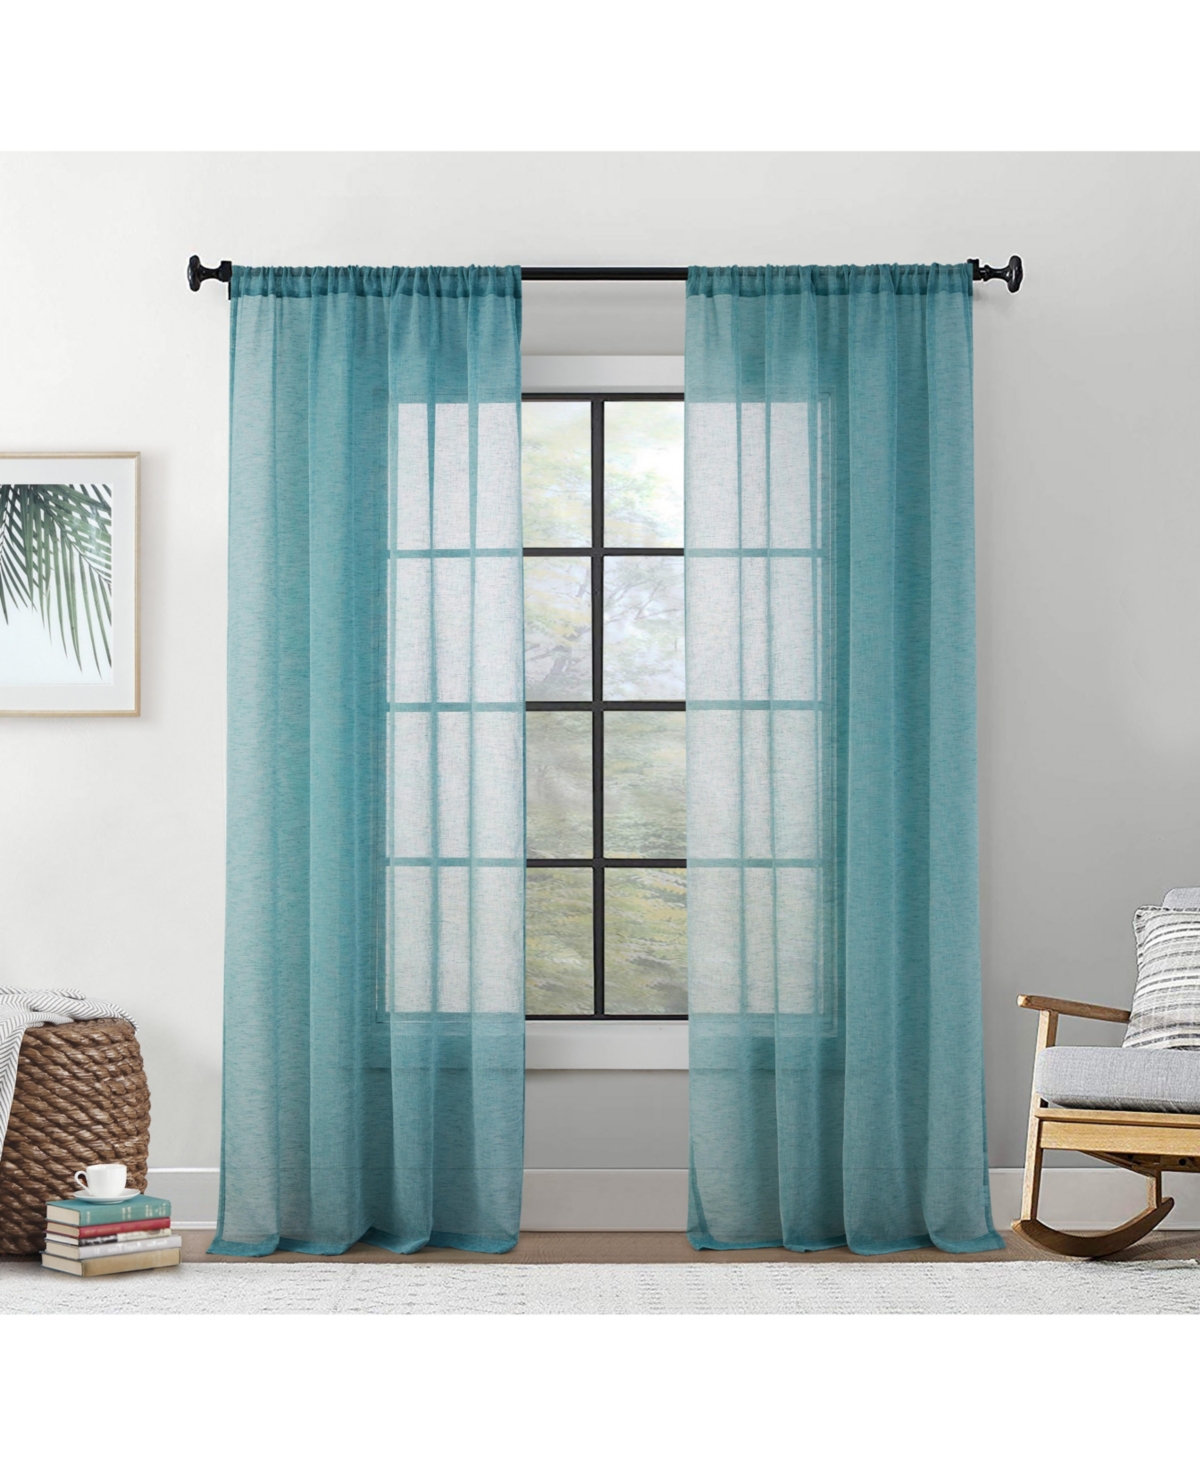 Penelope Faux Linen Textured Semi Sheer Privacy Sun Light Filtering Transparent Window Pocket Hole Thick Curtains Drapery Panels for Bedroom &